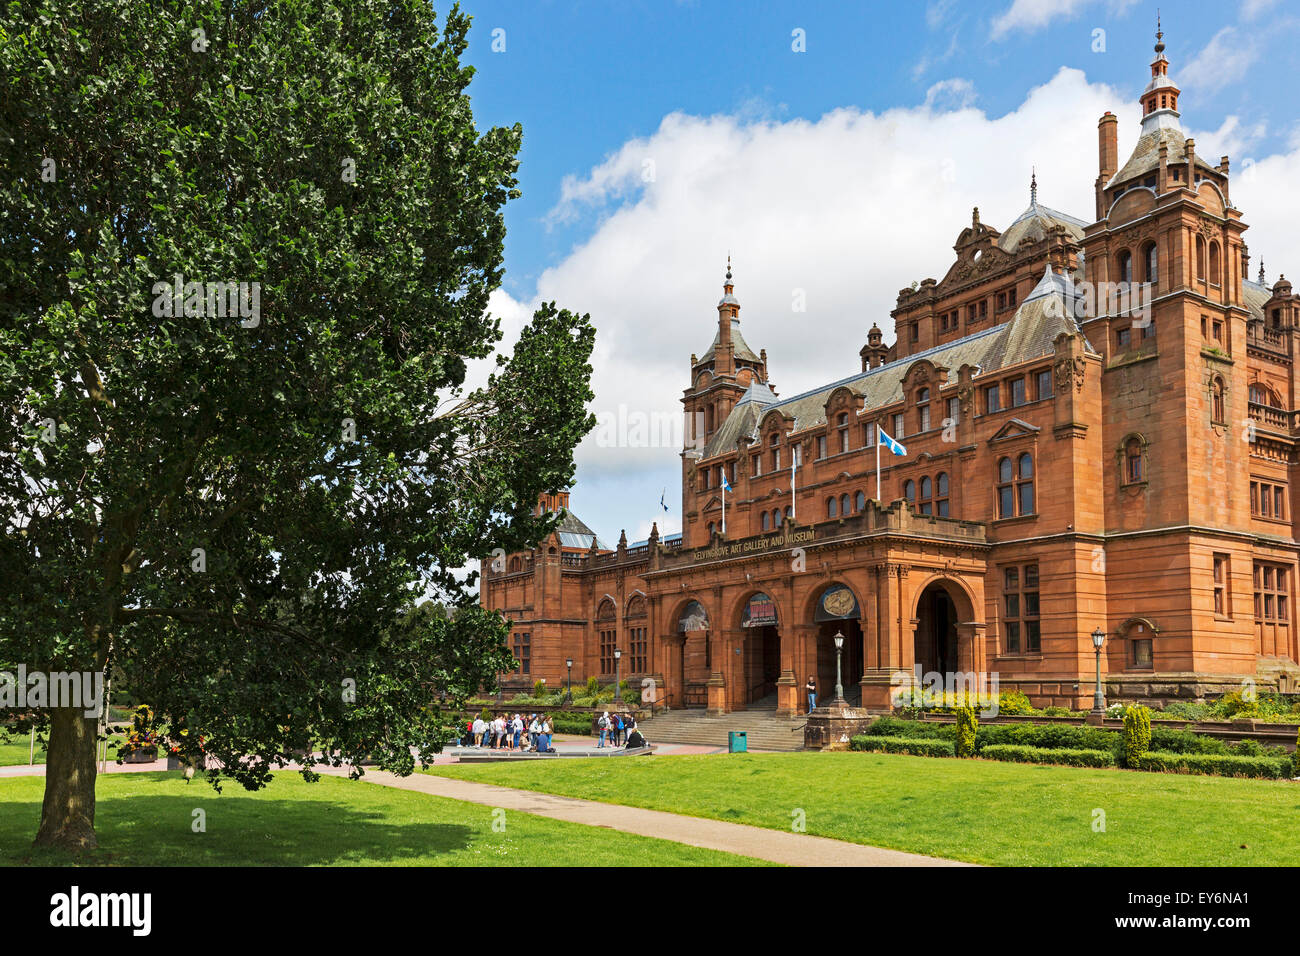 Kelvingrove Art Gallery and Museum, Glasgow, Ecosse, Royaume-Uni Banque D'Images